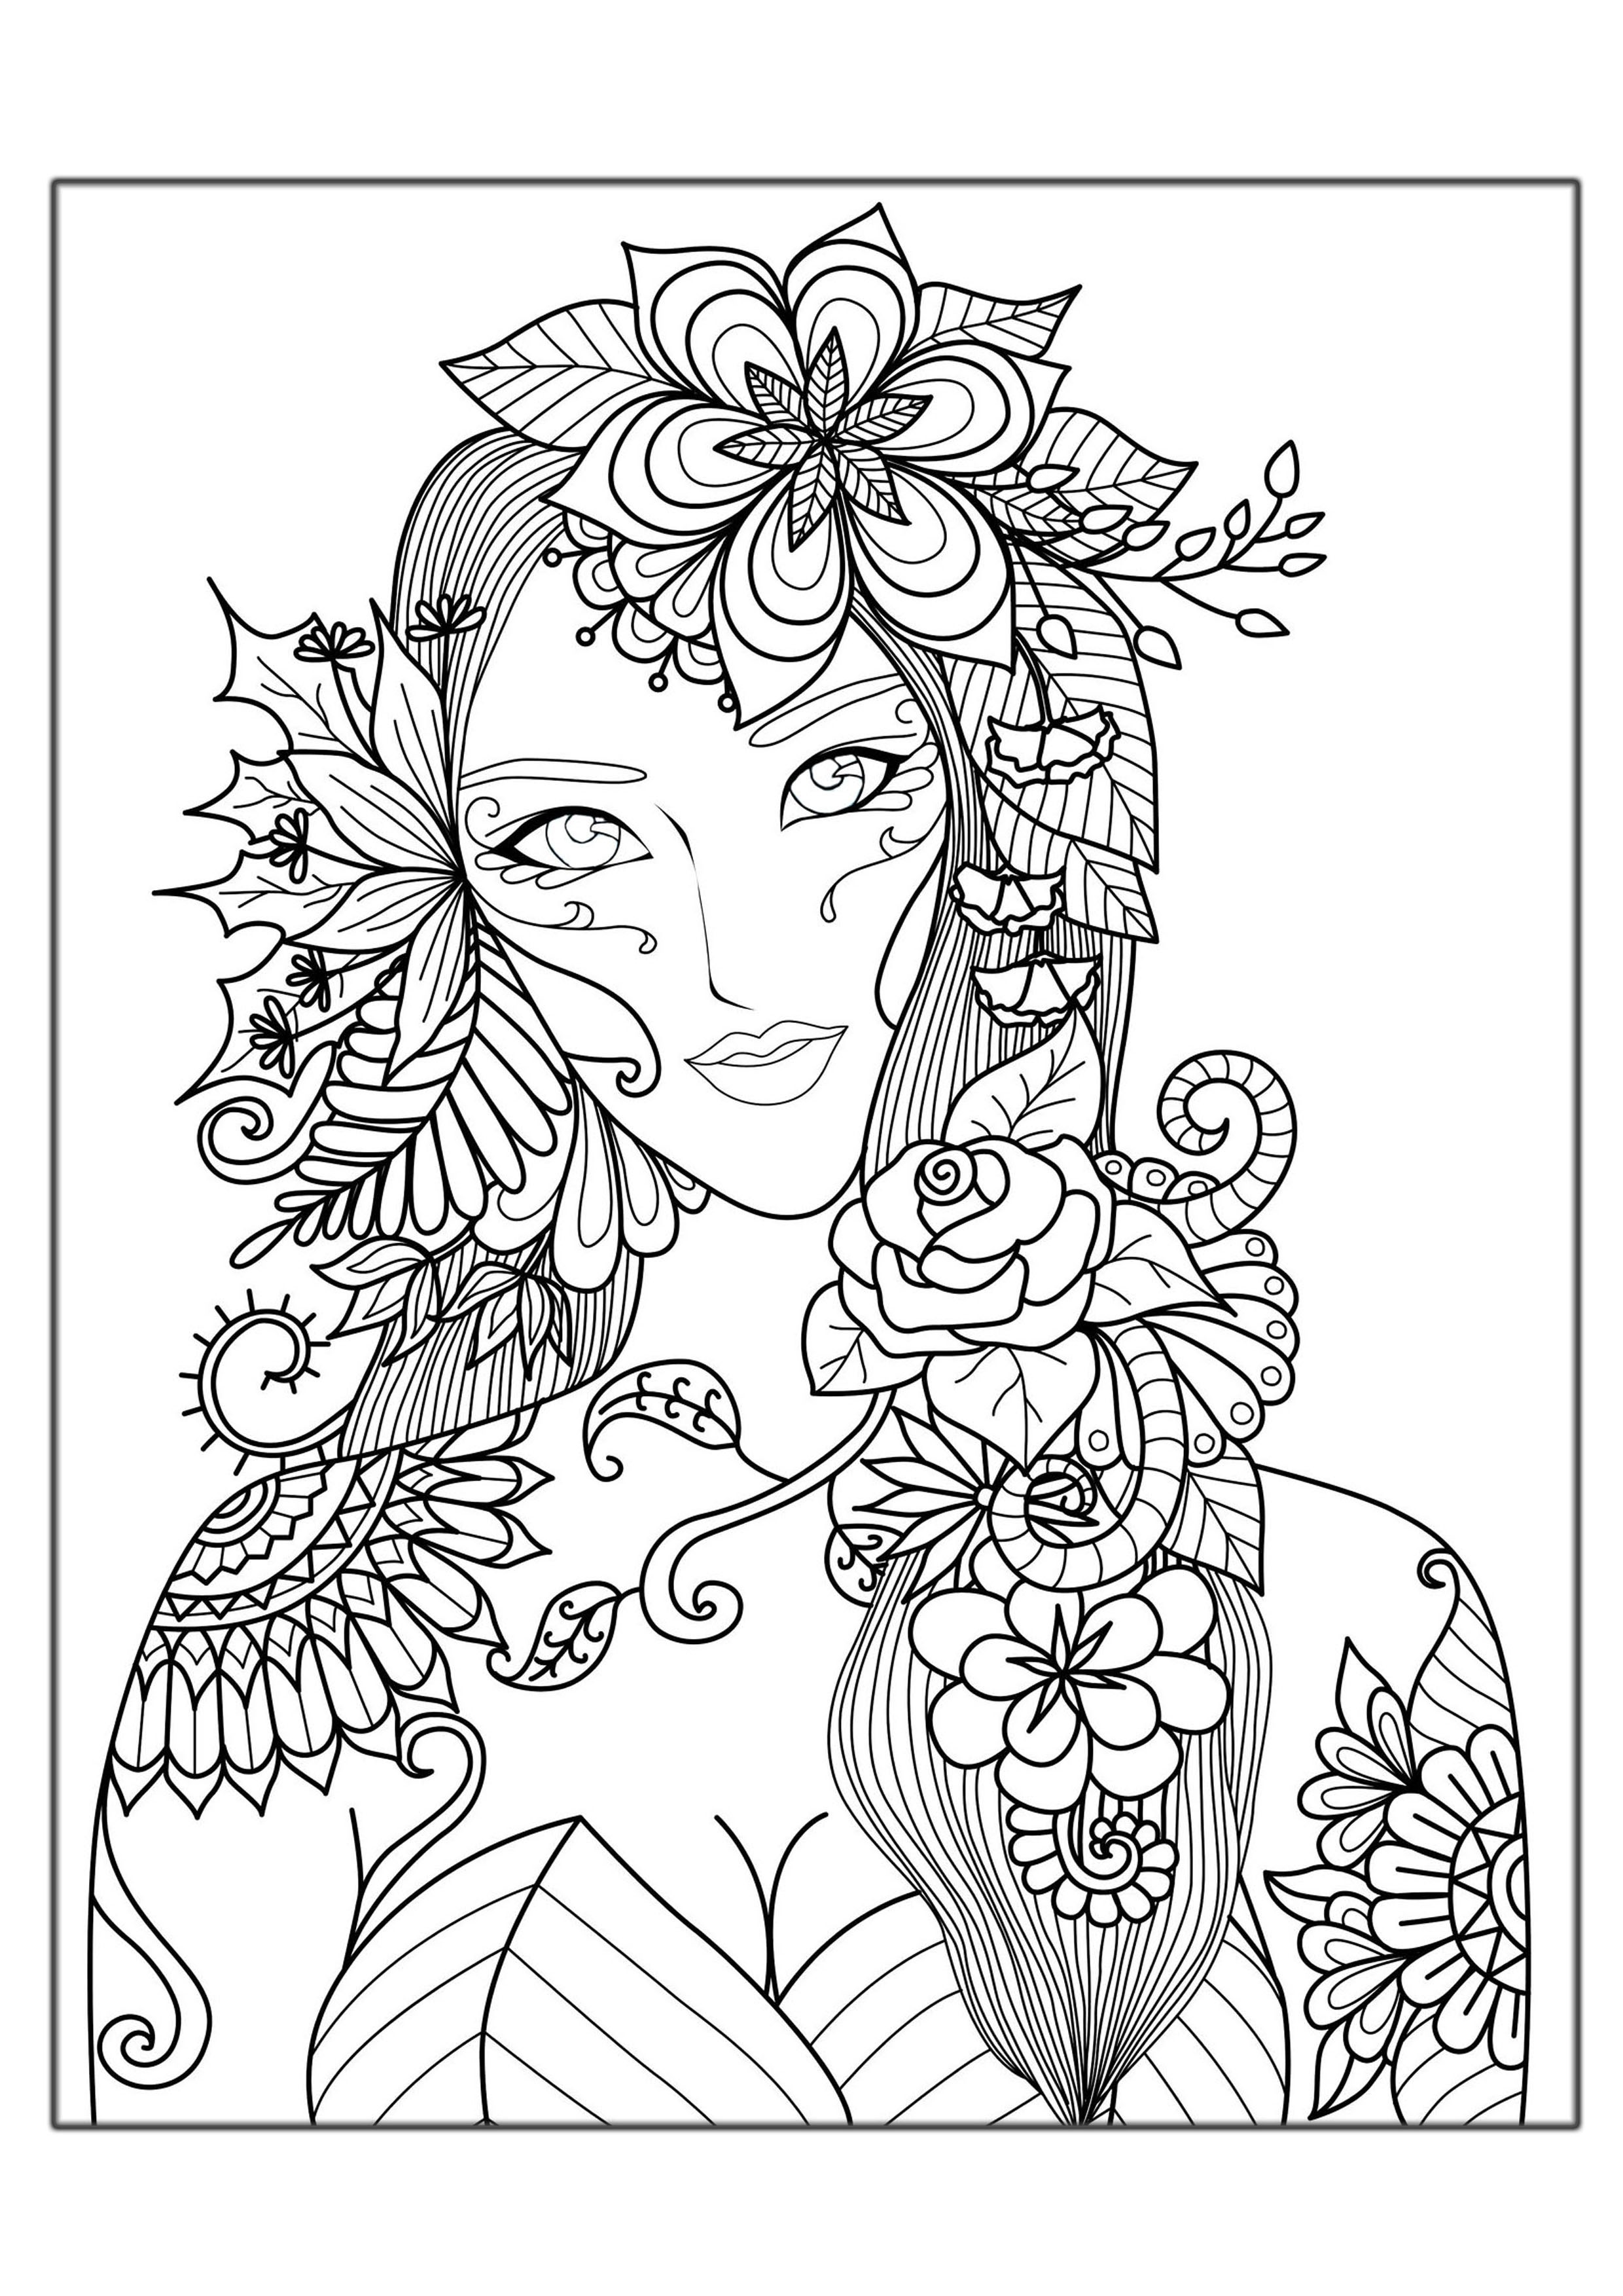 psychedelic-coloring-pages-to-download-and-print-for-free-psyamb-50-trippy-coloring-pages